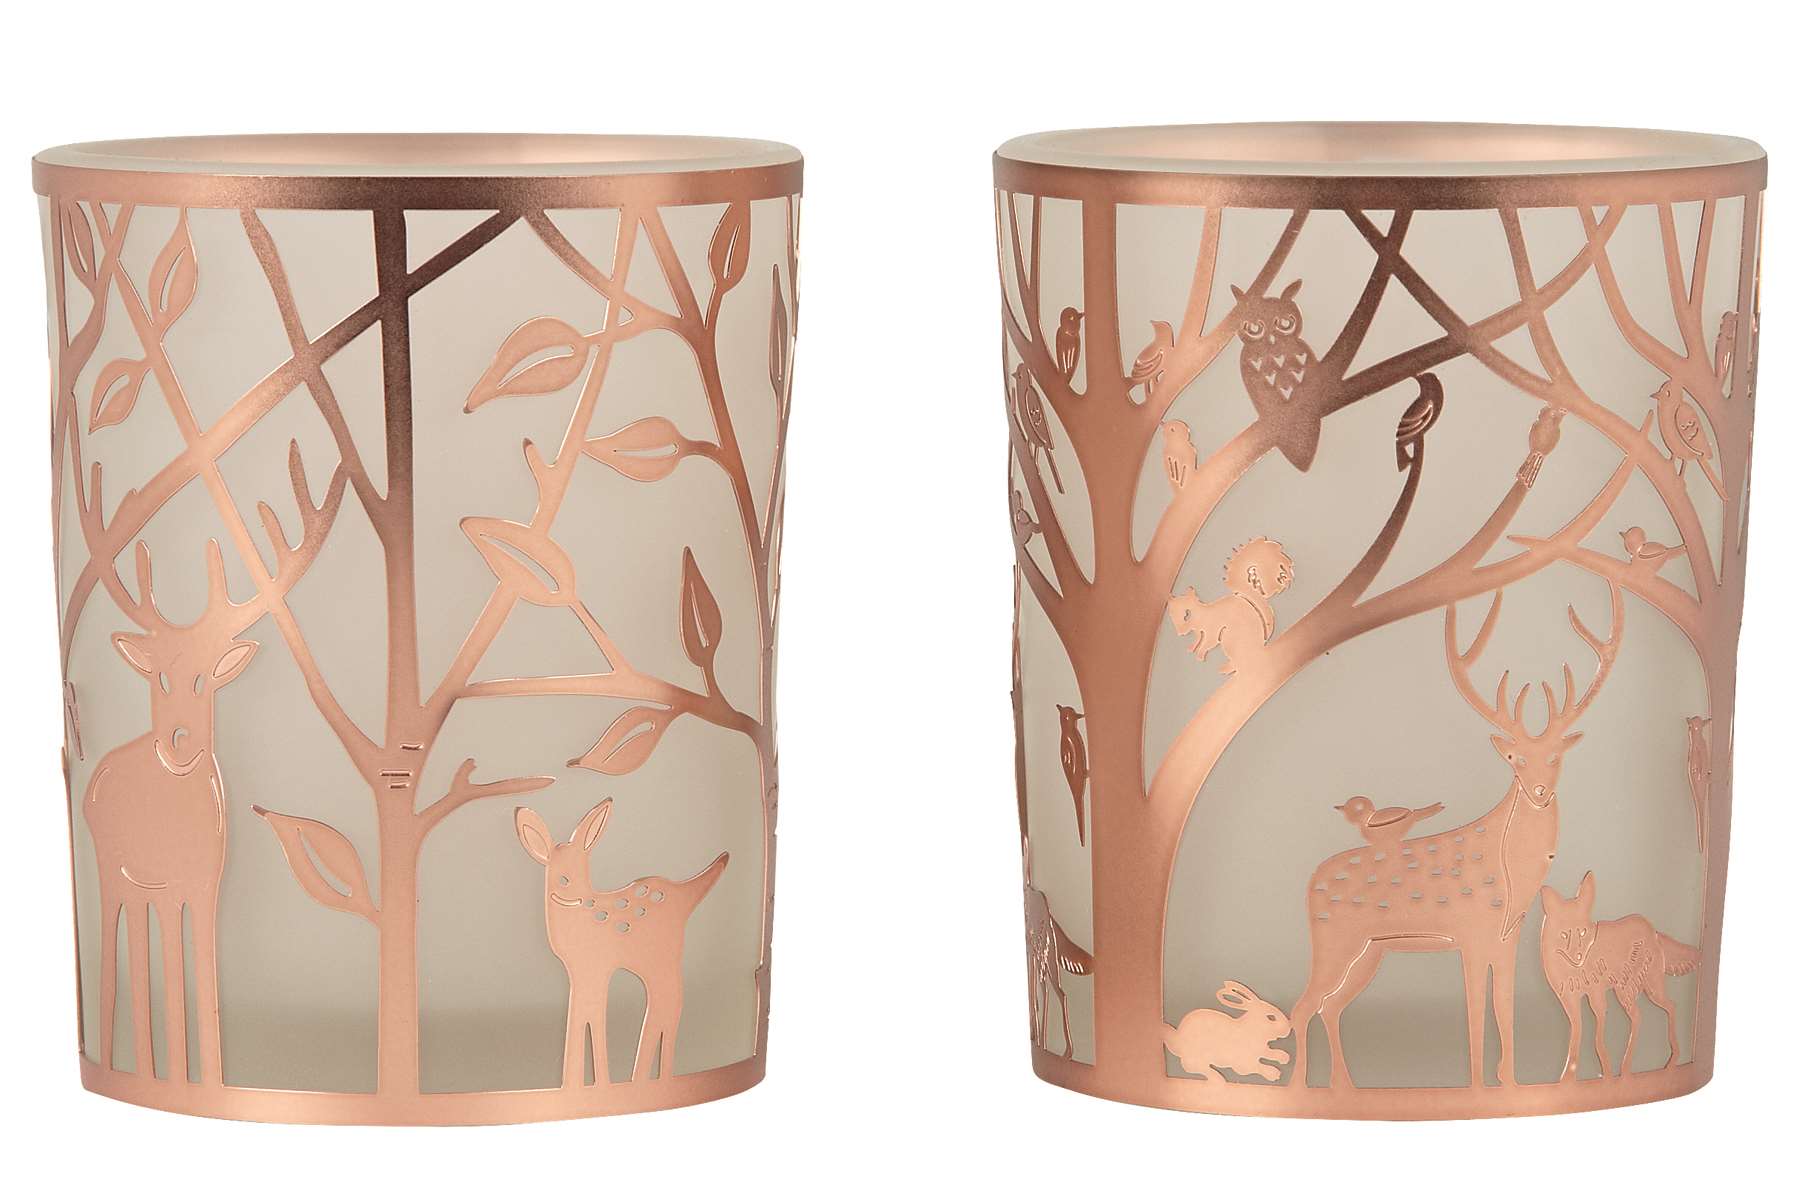 Woodland scene tealight holders will set the right tone, £7.50, M&S